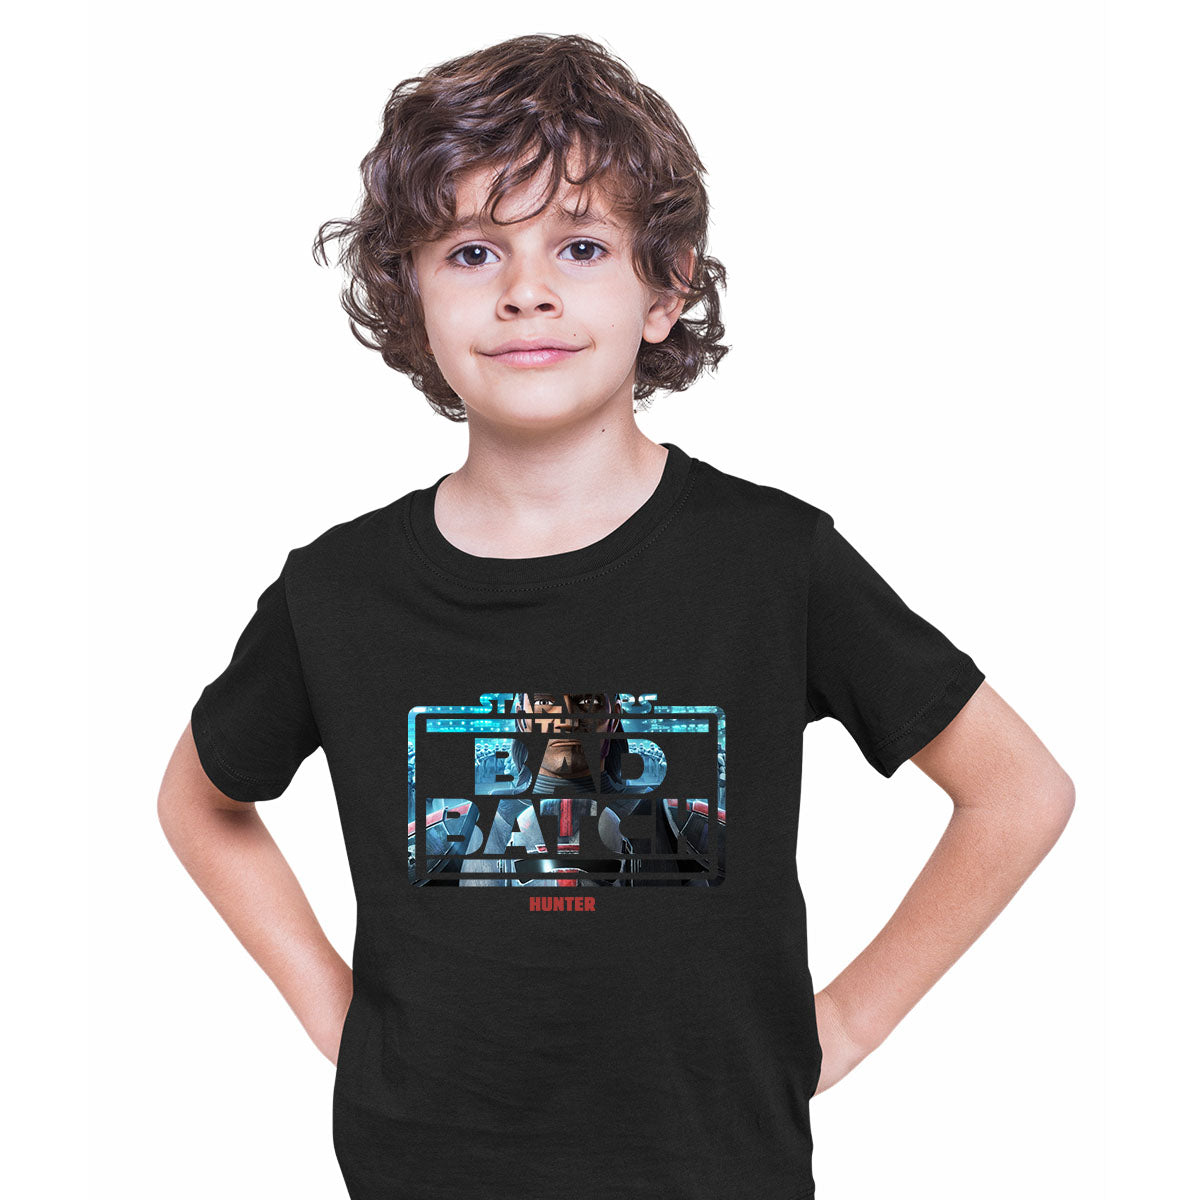 The Bad Batch - Hunter Clone Wars T-Shirt Novelty Funny Gift Movie Colorful T-shirt for Kids - Kuzi Tees